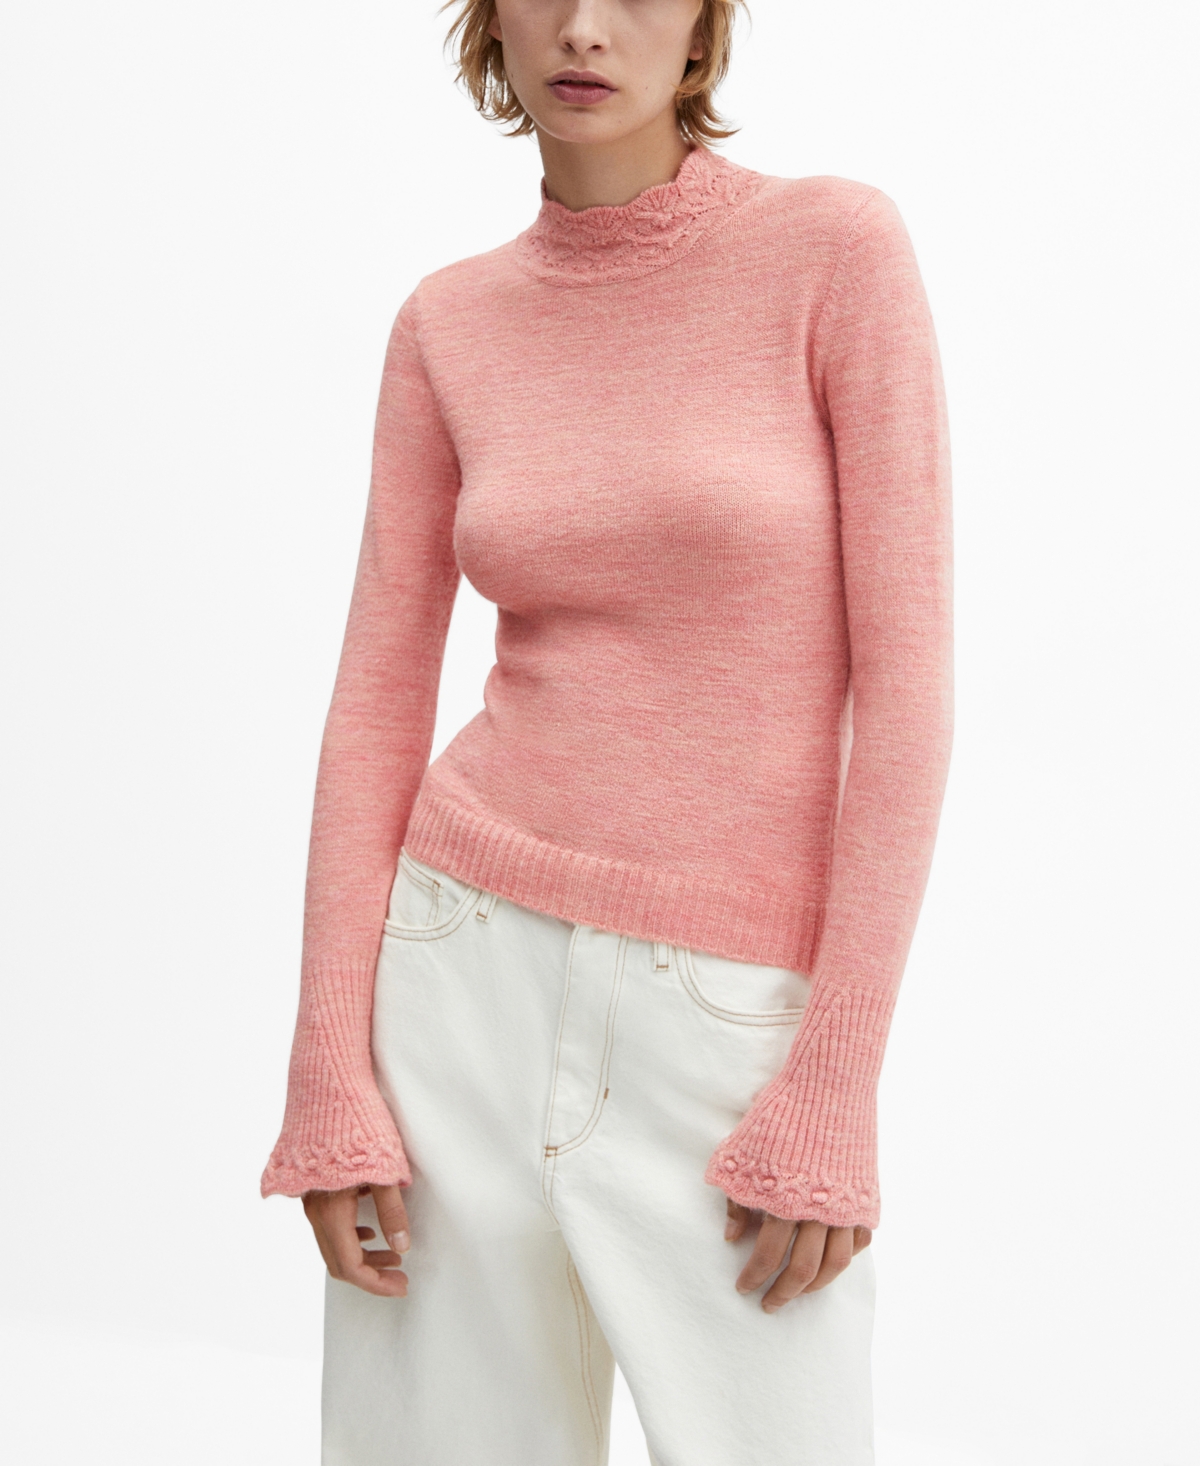 Mango Women's Knitted Cropped Sweater In Pink